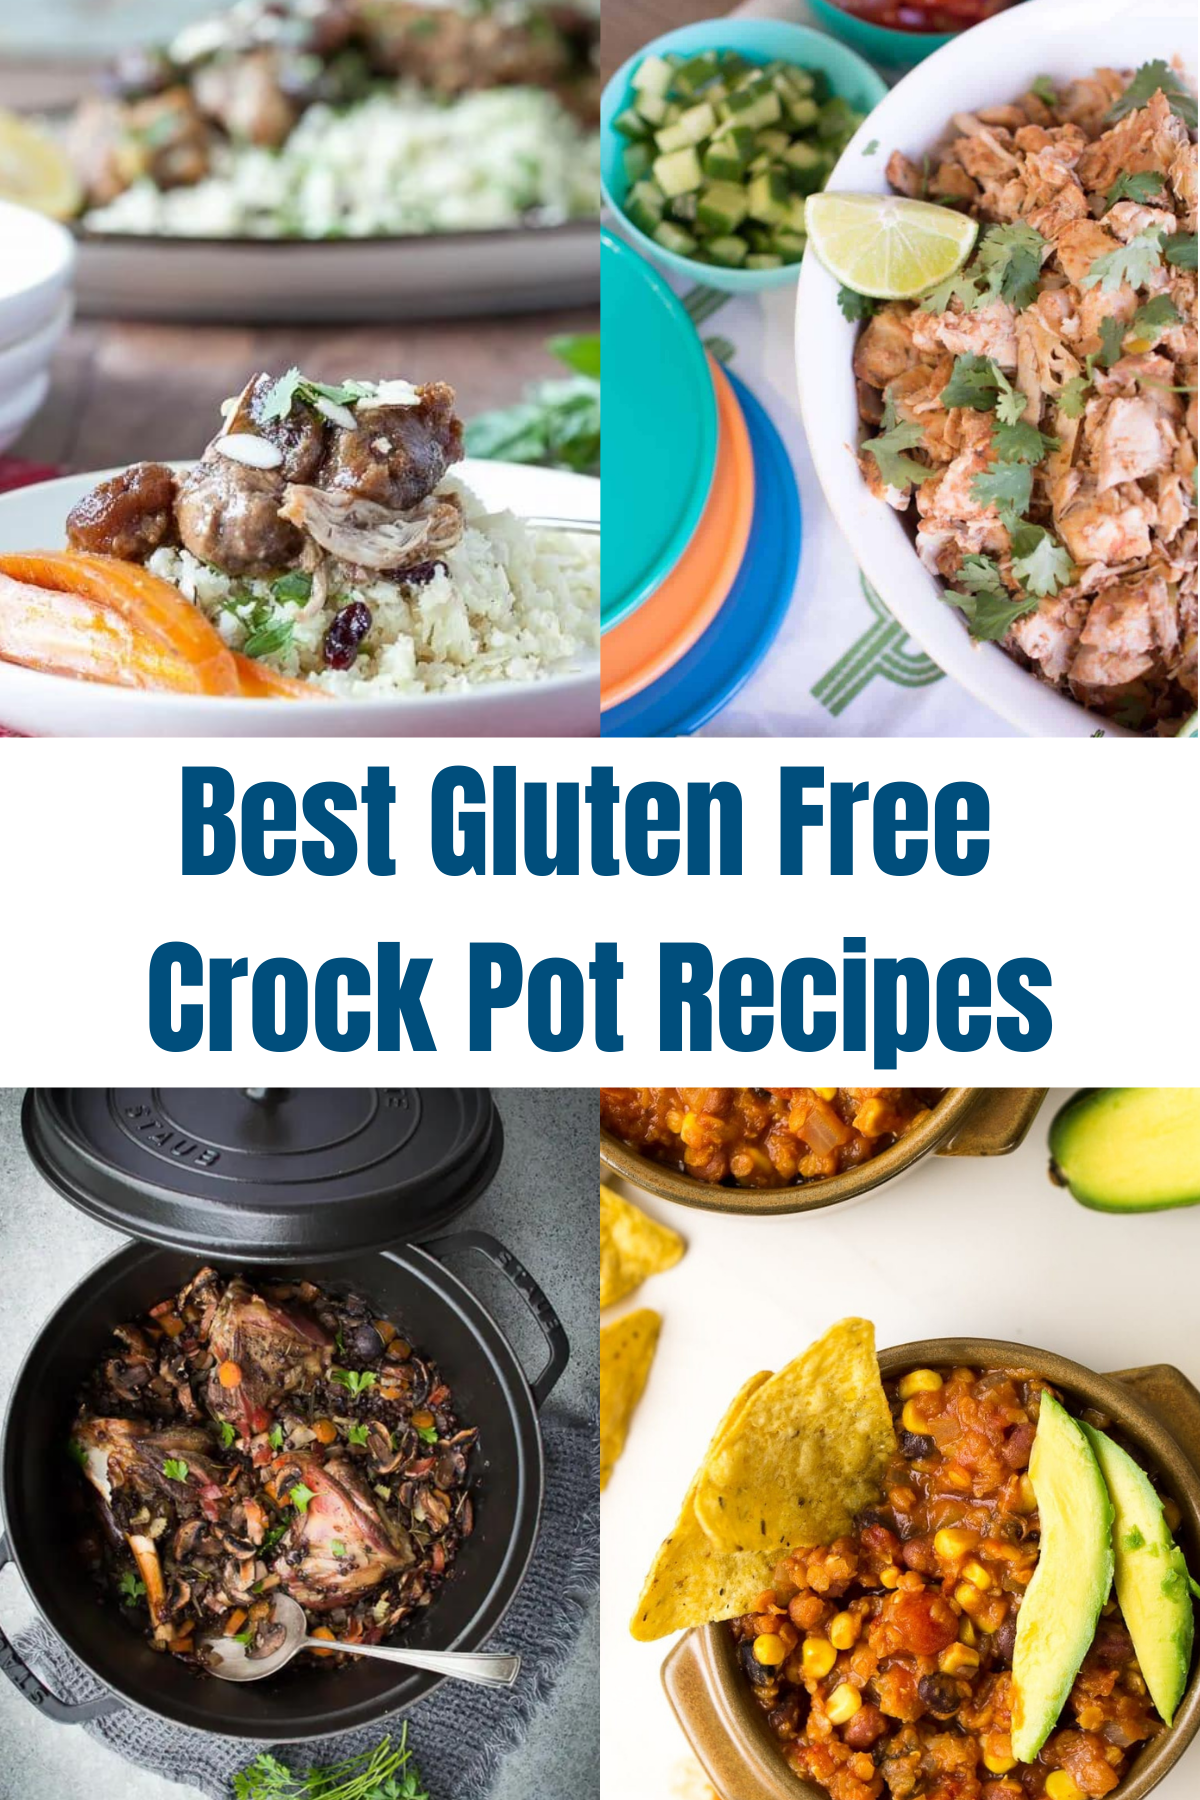 Best Gluten Free Crock Pot Recipes with four of the recipes included.